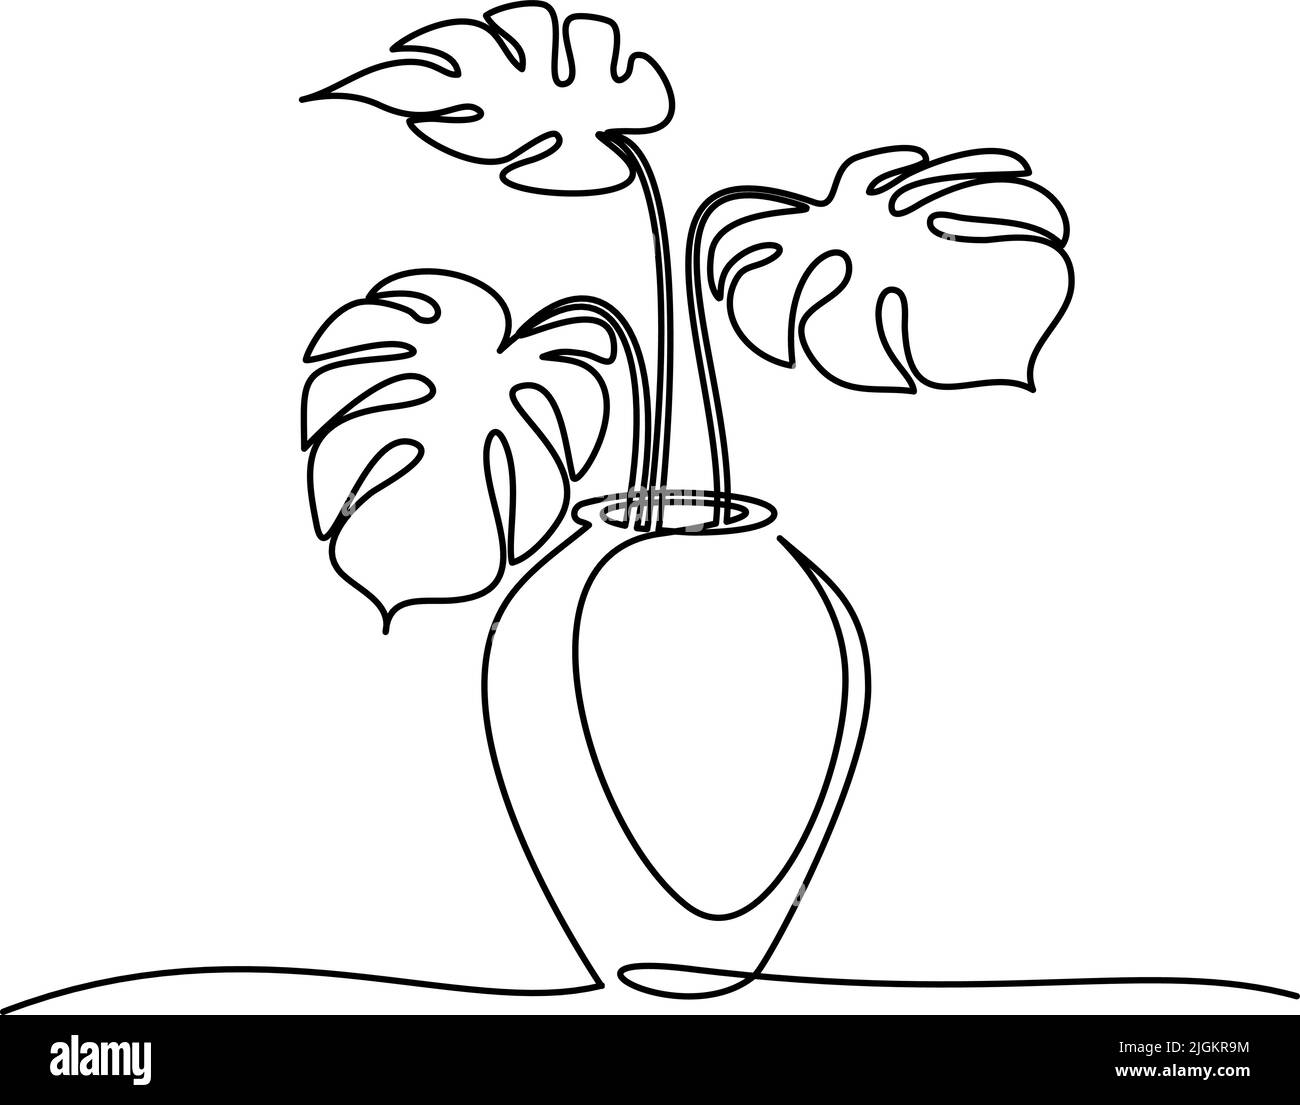 Houseplant in big pot. Continuous one line drawing. Monstera, split leaf philodendron hand drawn floral silhouette. Tropical plant, exotic foliage. Ve Stock Vector